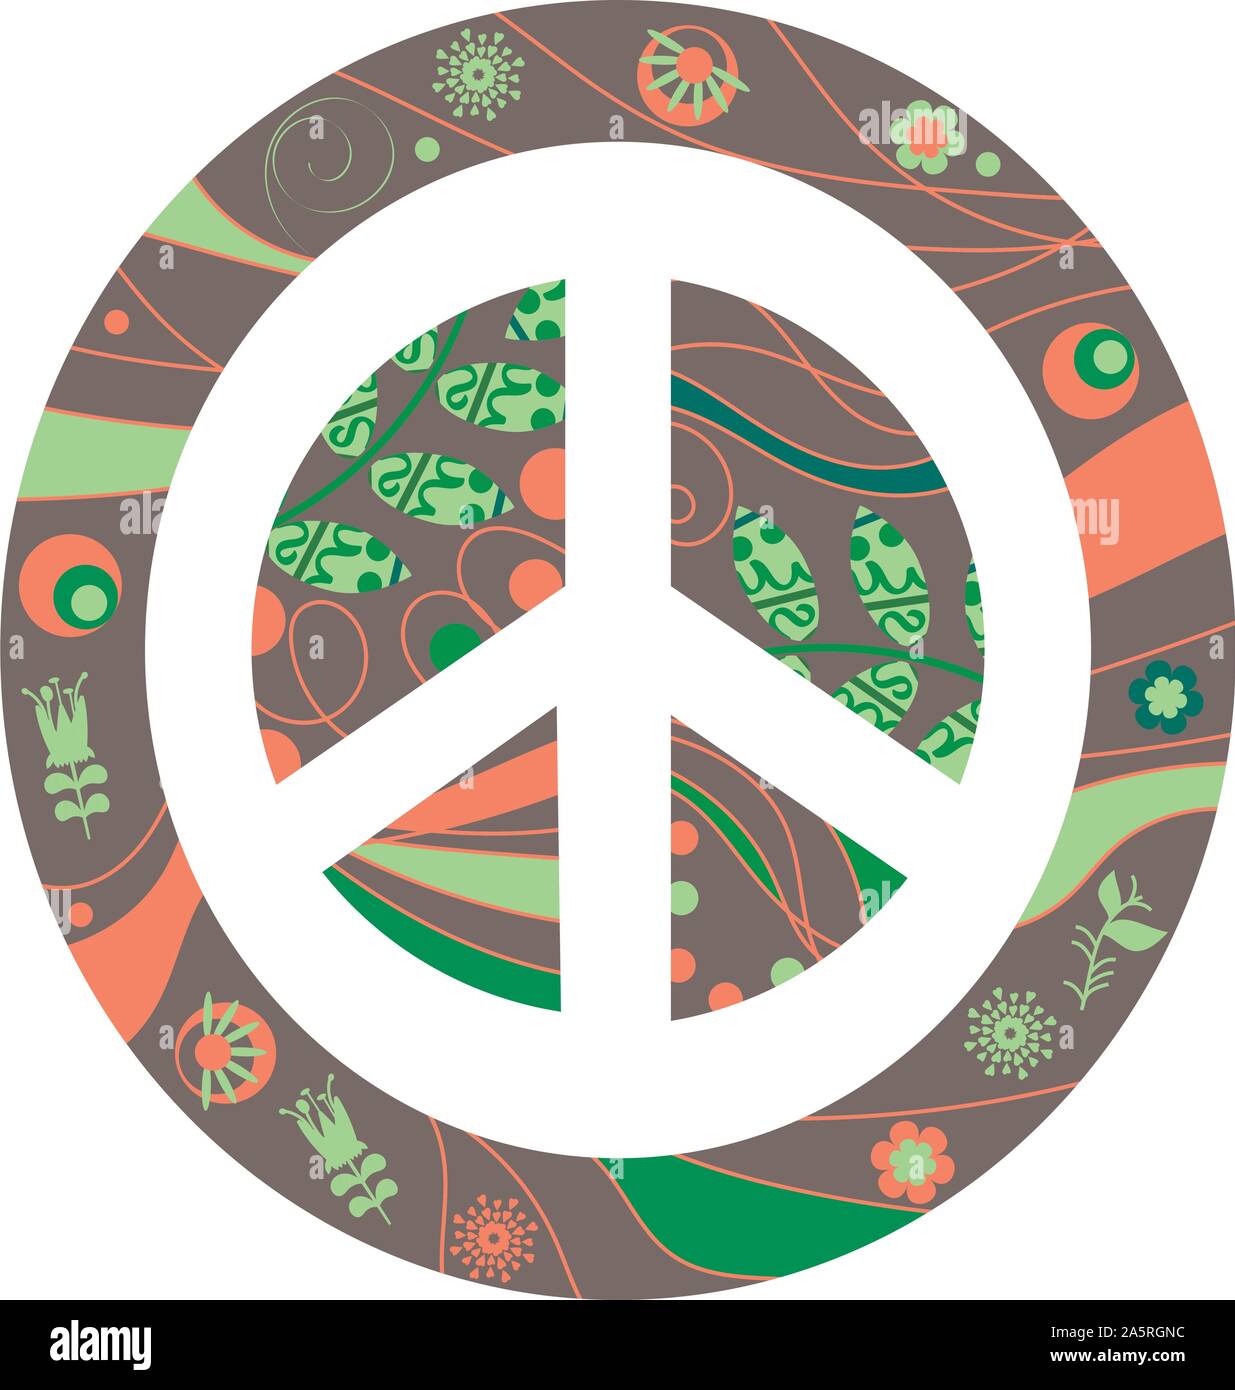 Floral and swirls colorful abstract vector peace sign. Vivid image in hippy style Stock Vector